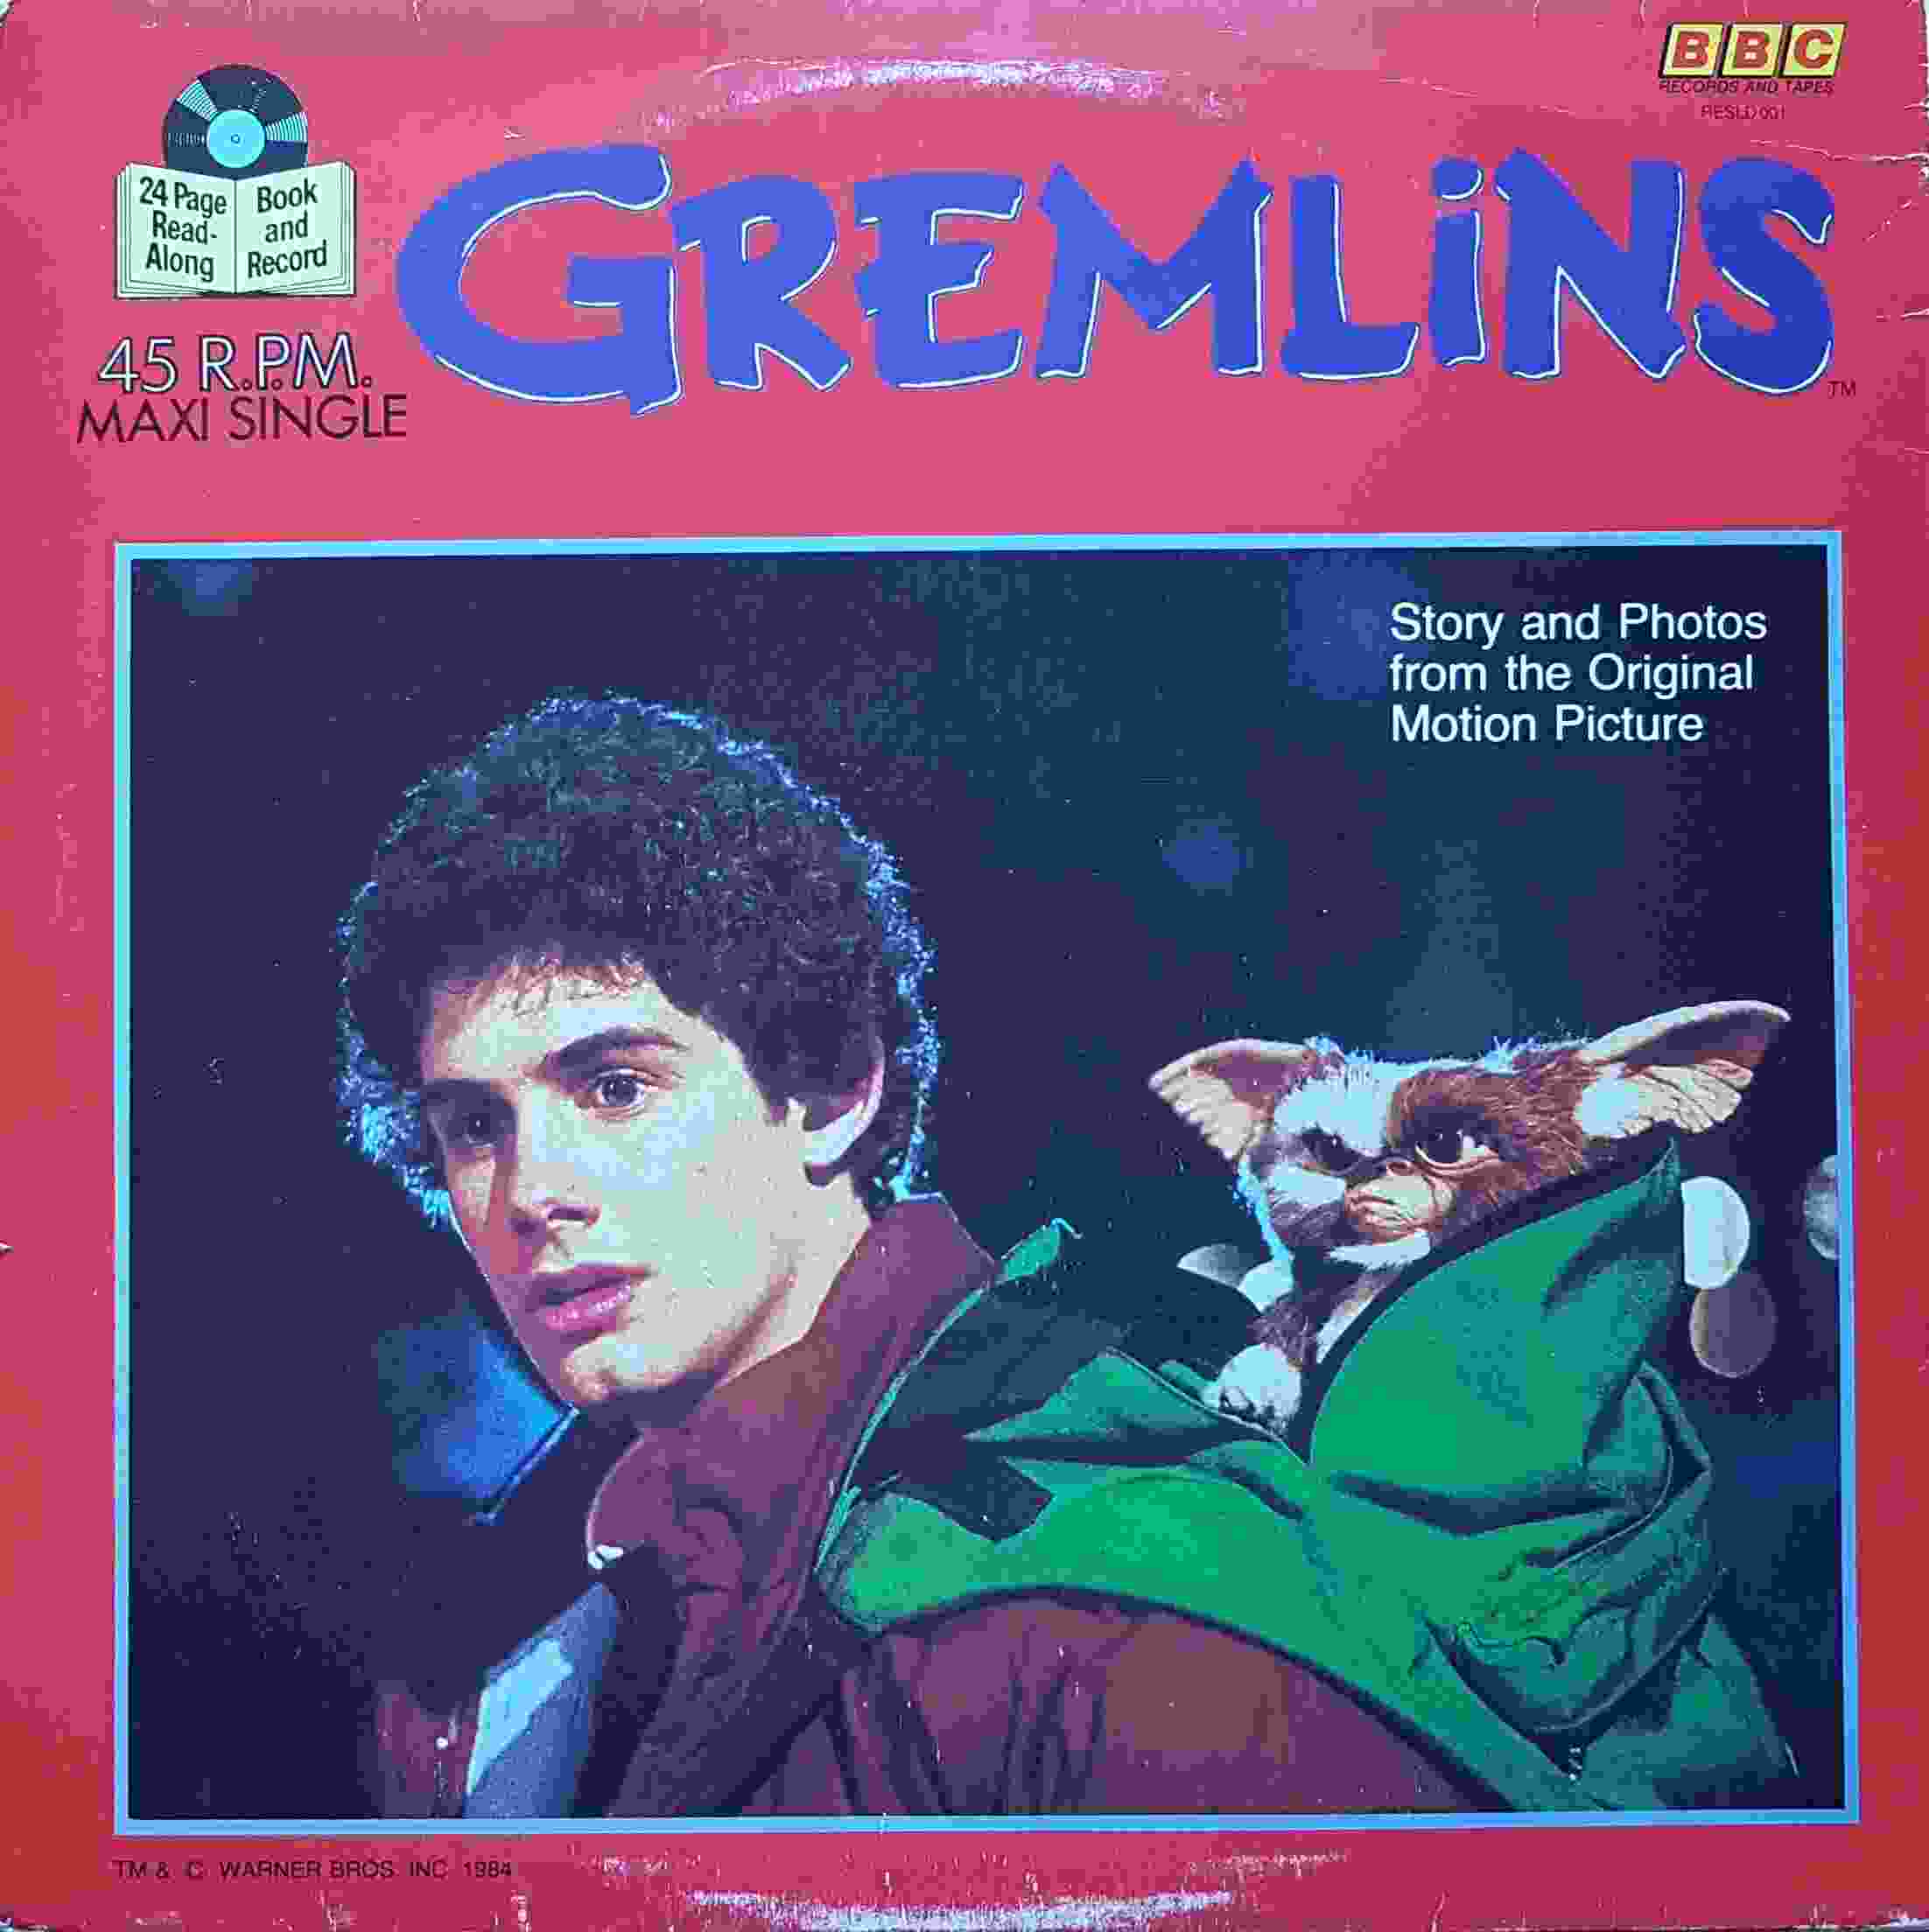 Picture of RESLD 001 Gremlins by artist Unknown from the BBC records and Tapes library